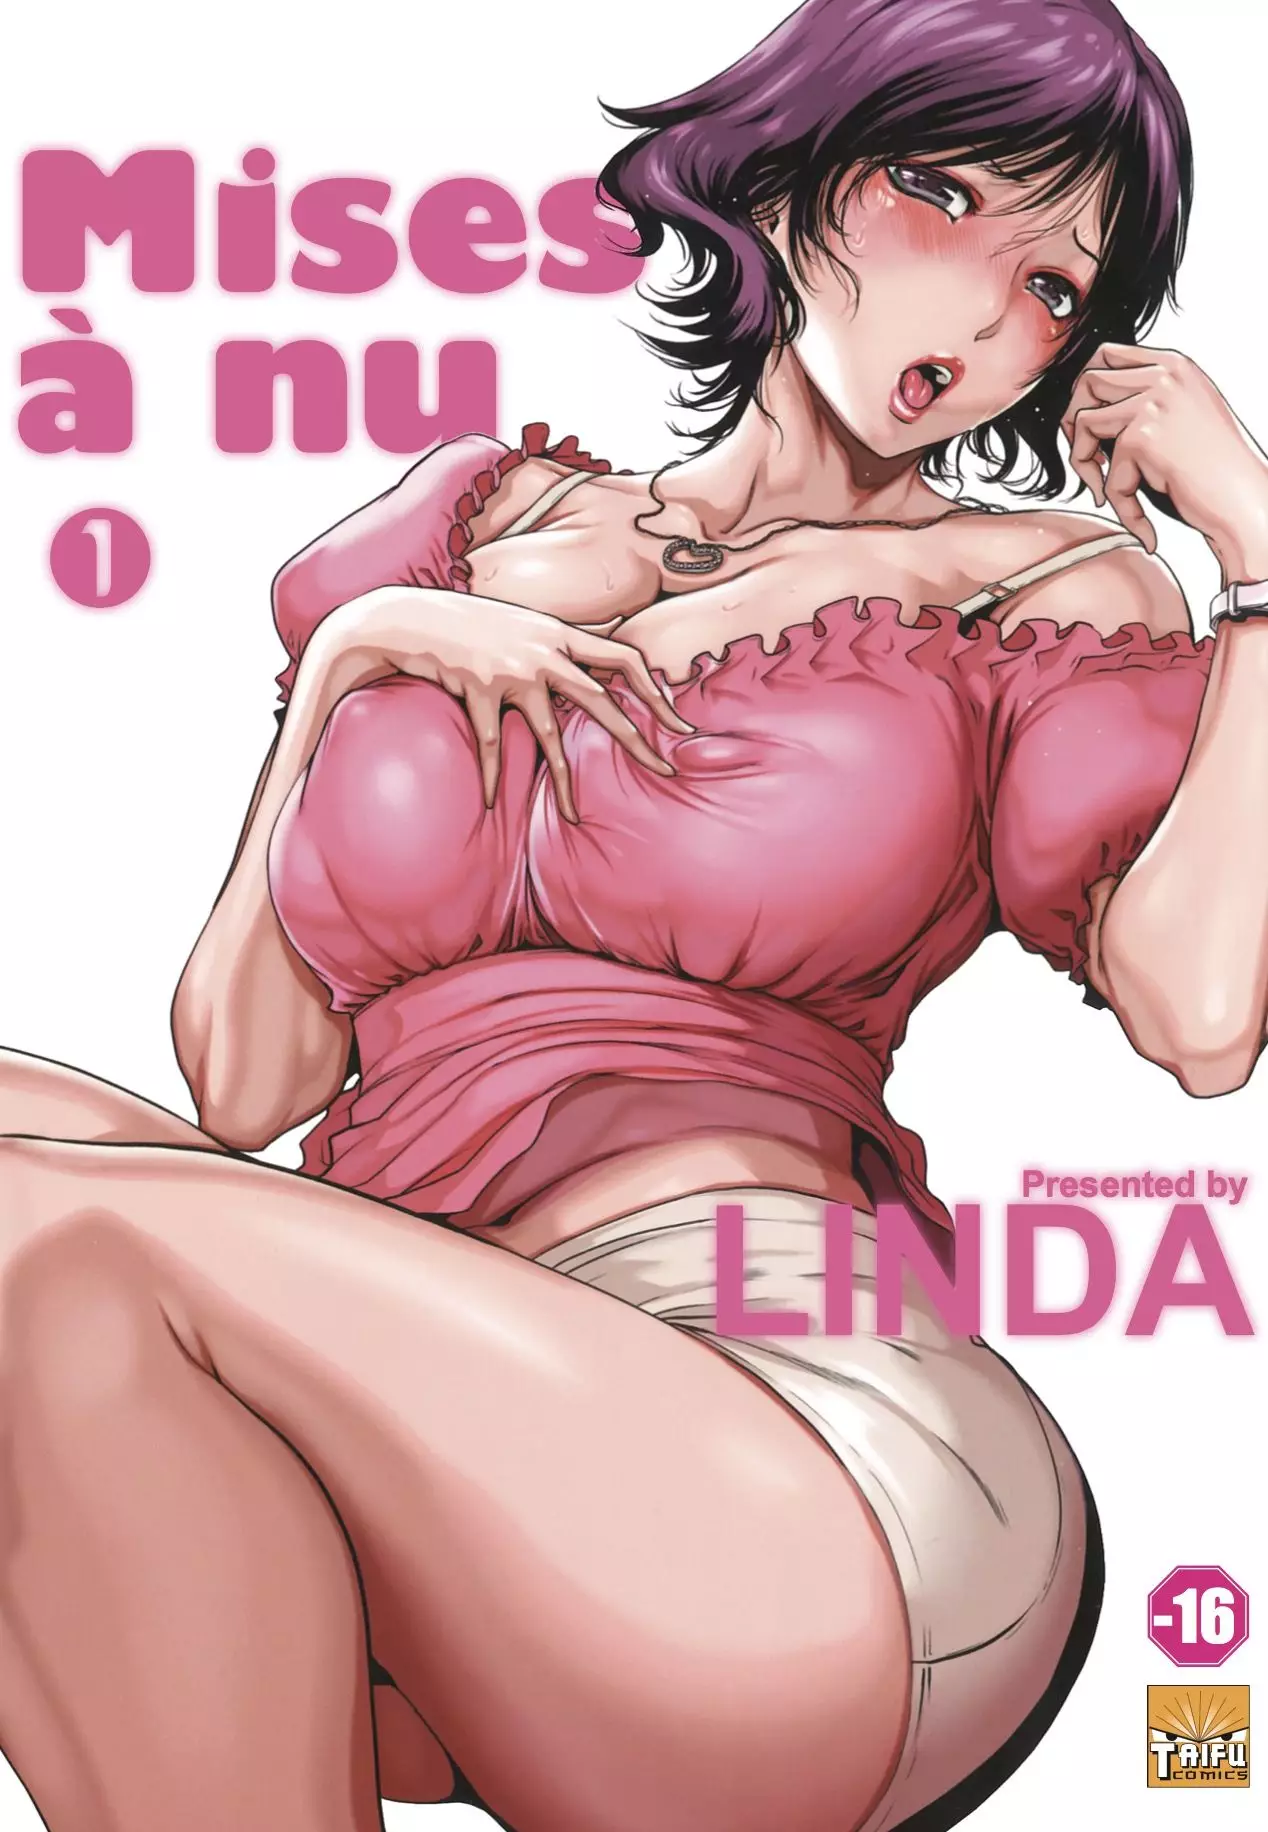 Manga tout nue - Best adult videos and photos